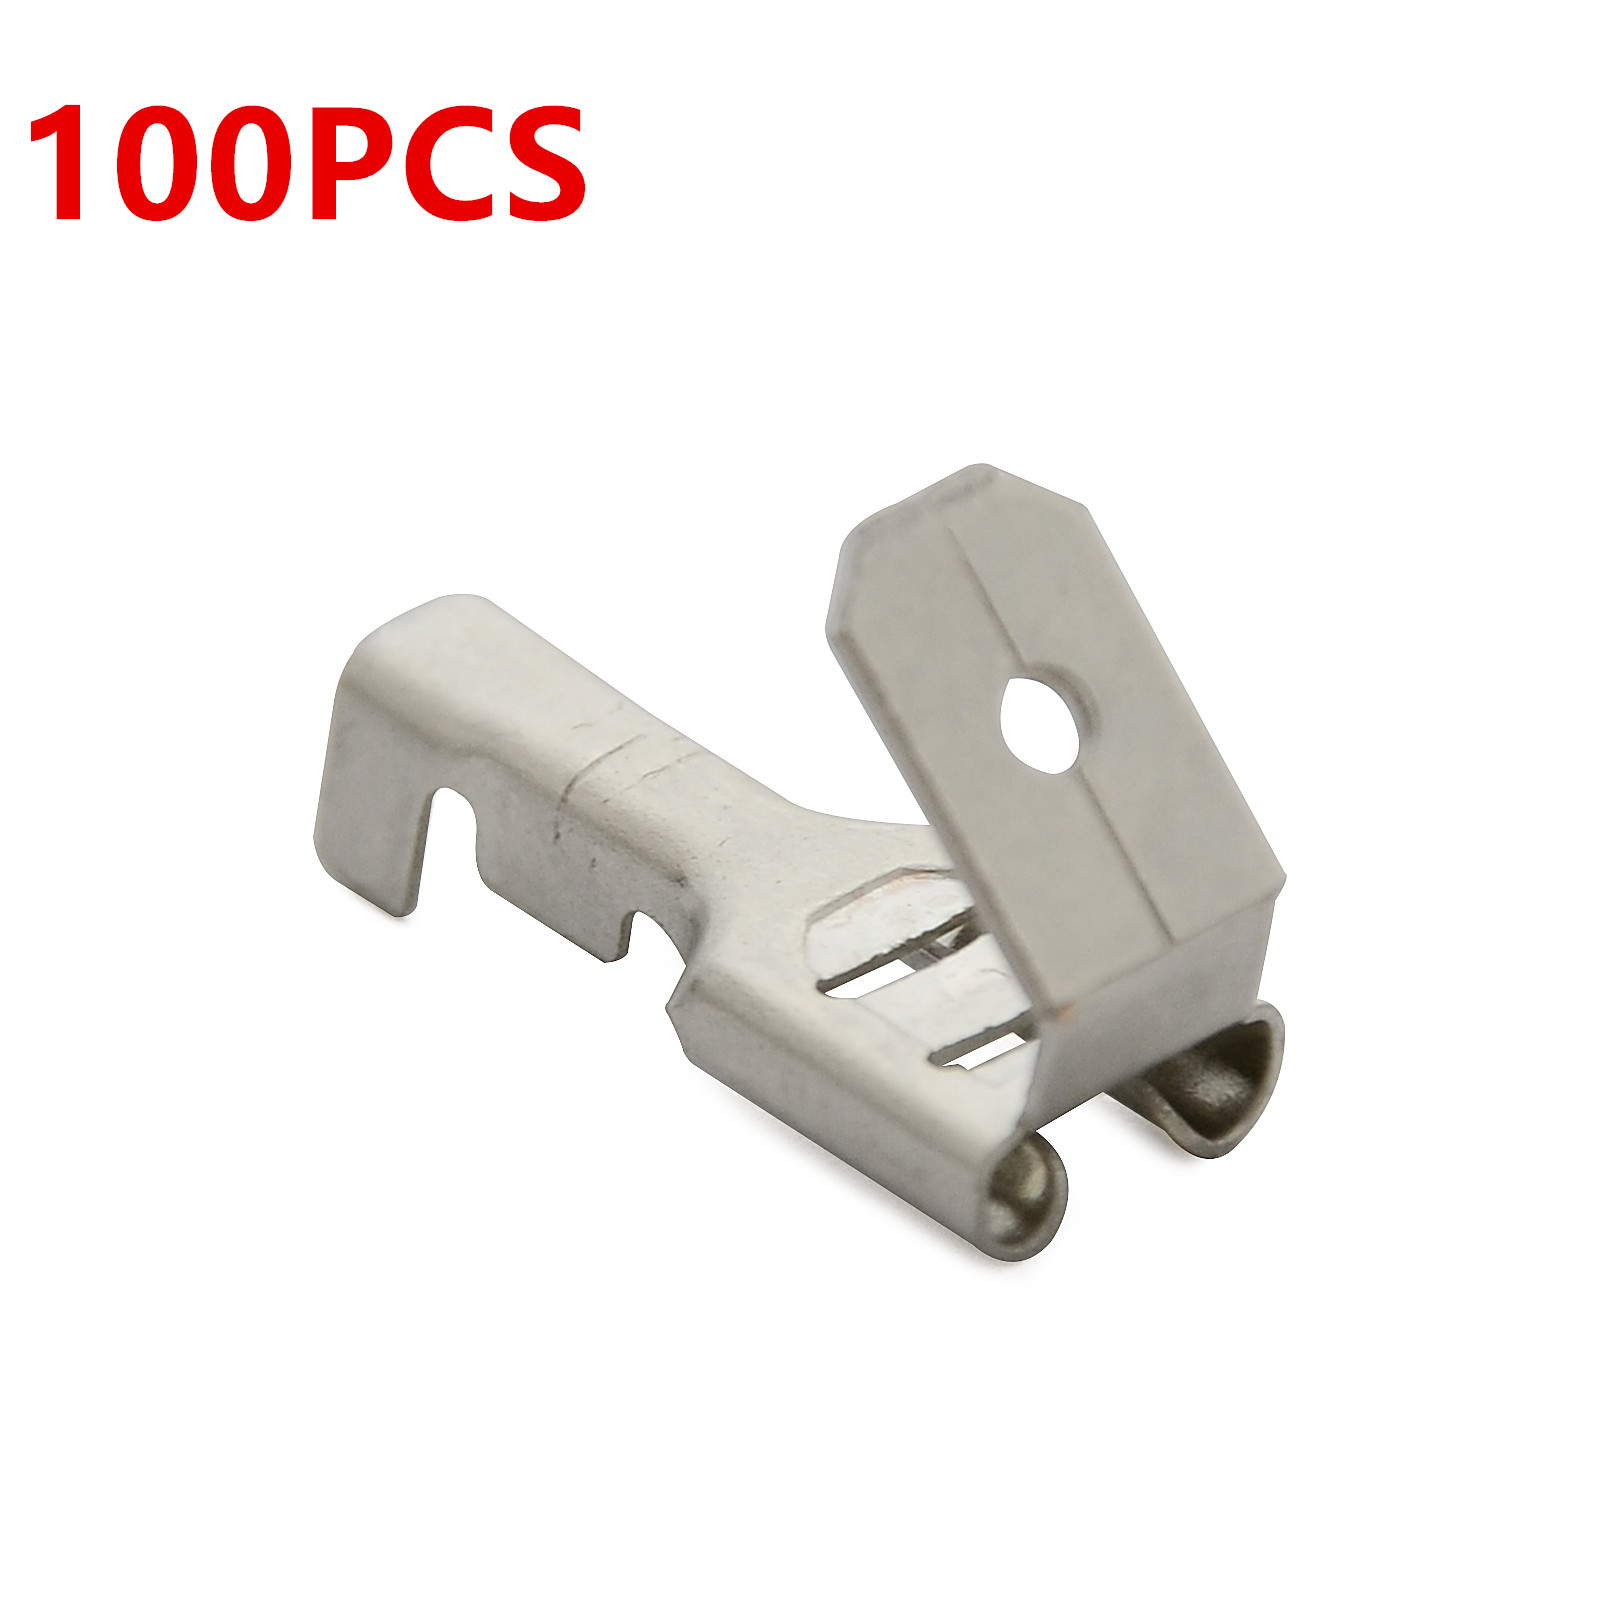 100PCS Non-Insulated 6.3mm Tinned Brass Terminals Connector Spade Female//Male